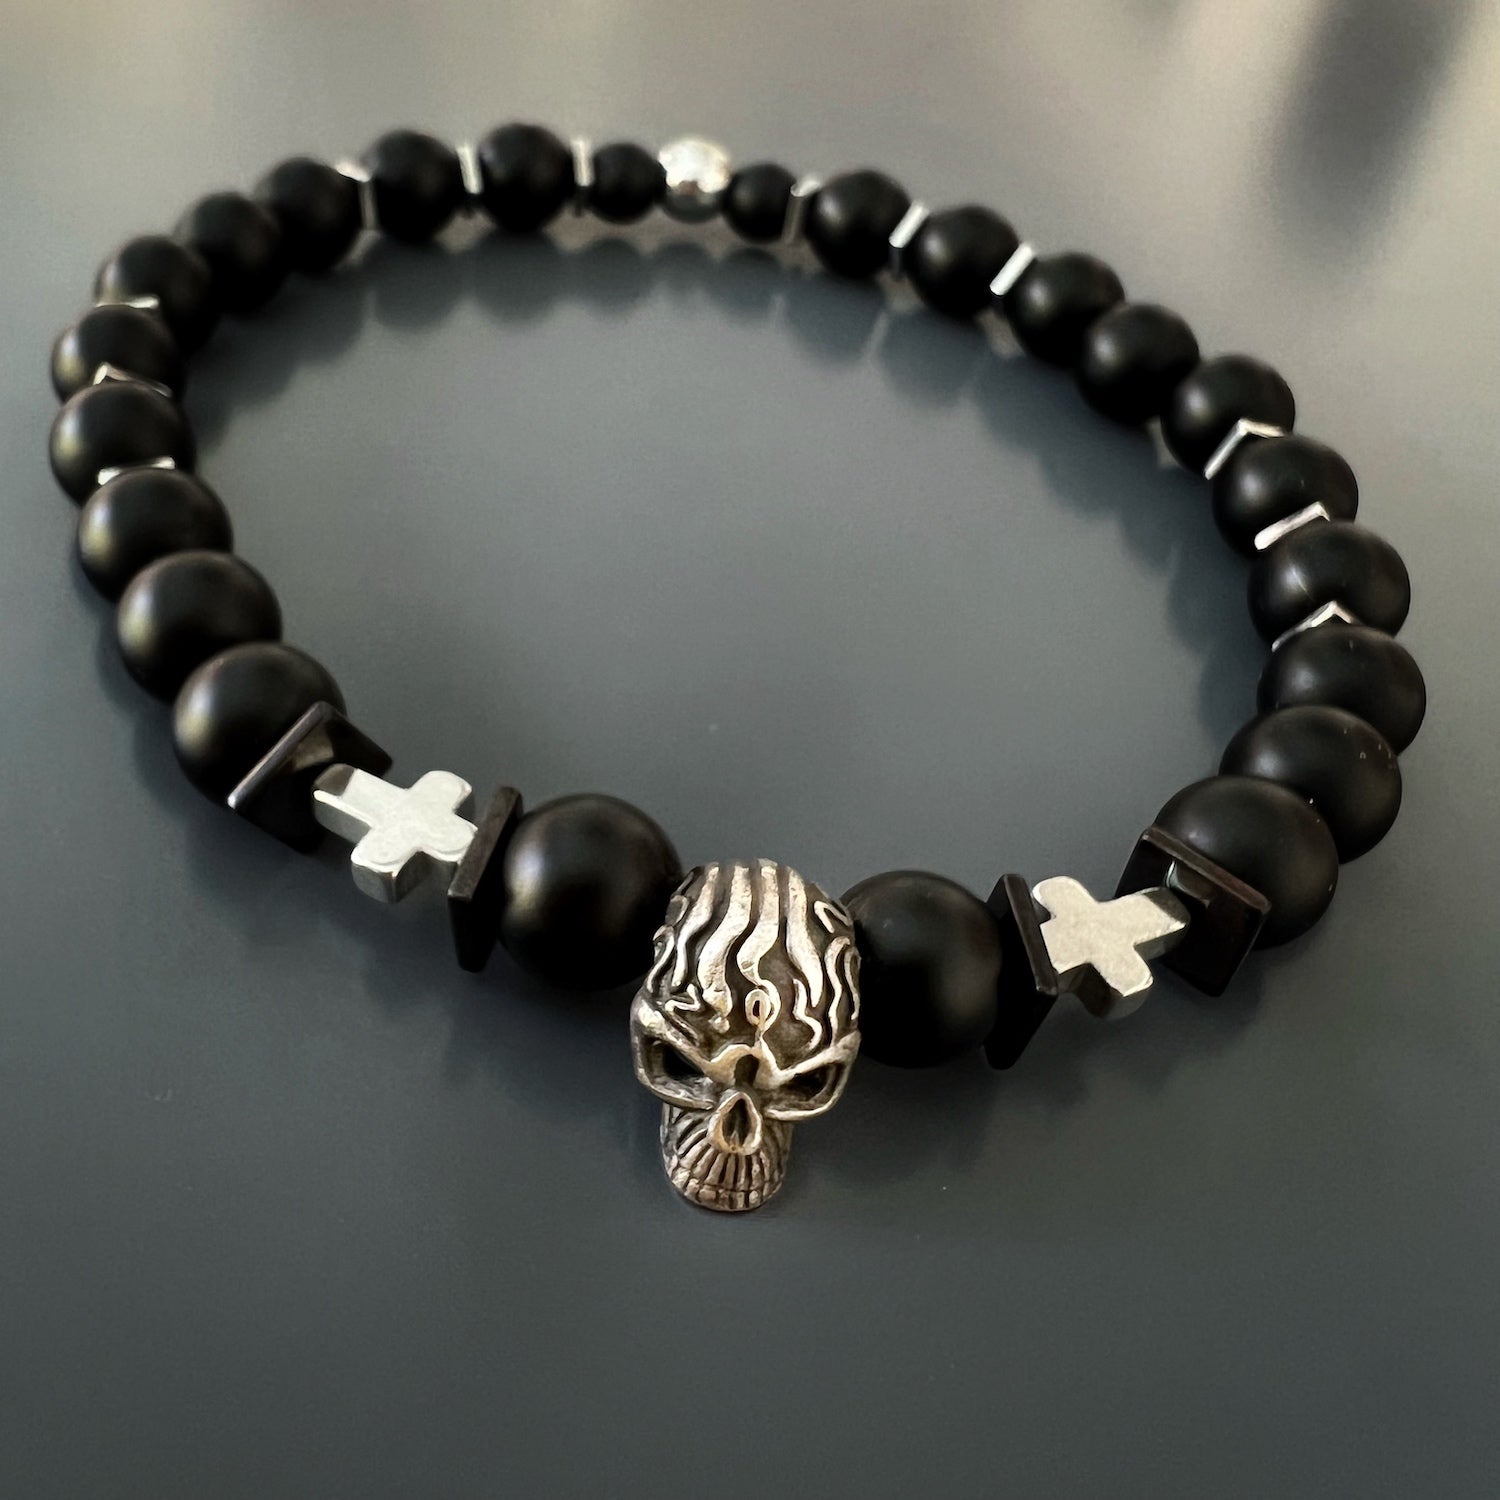 The Courage Onyx Skull Bracelet is a stunning handmade piece that embodies courage and fearlessness. 